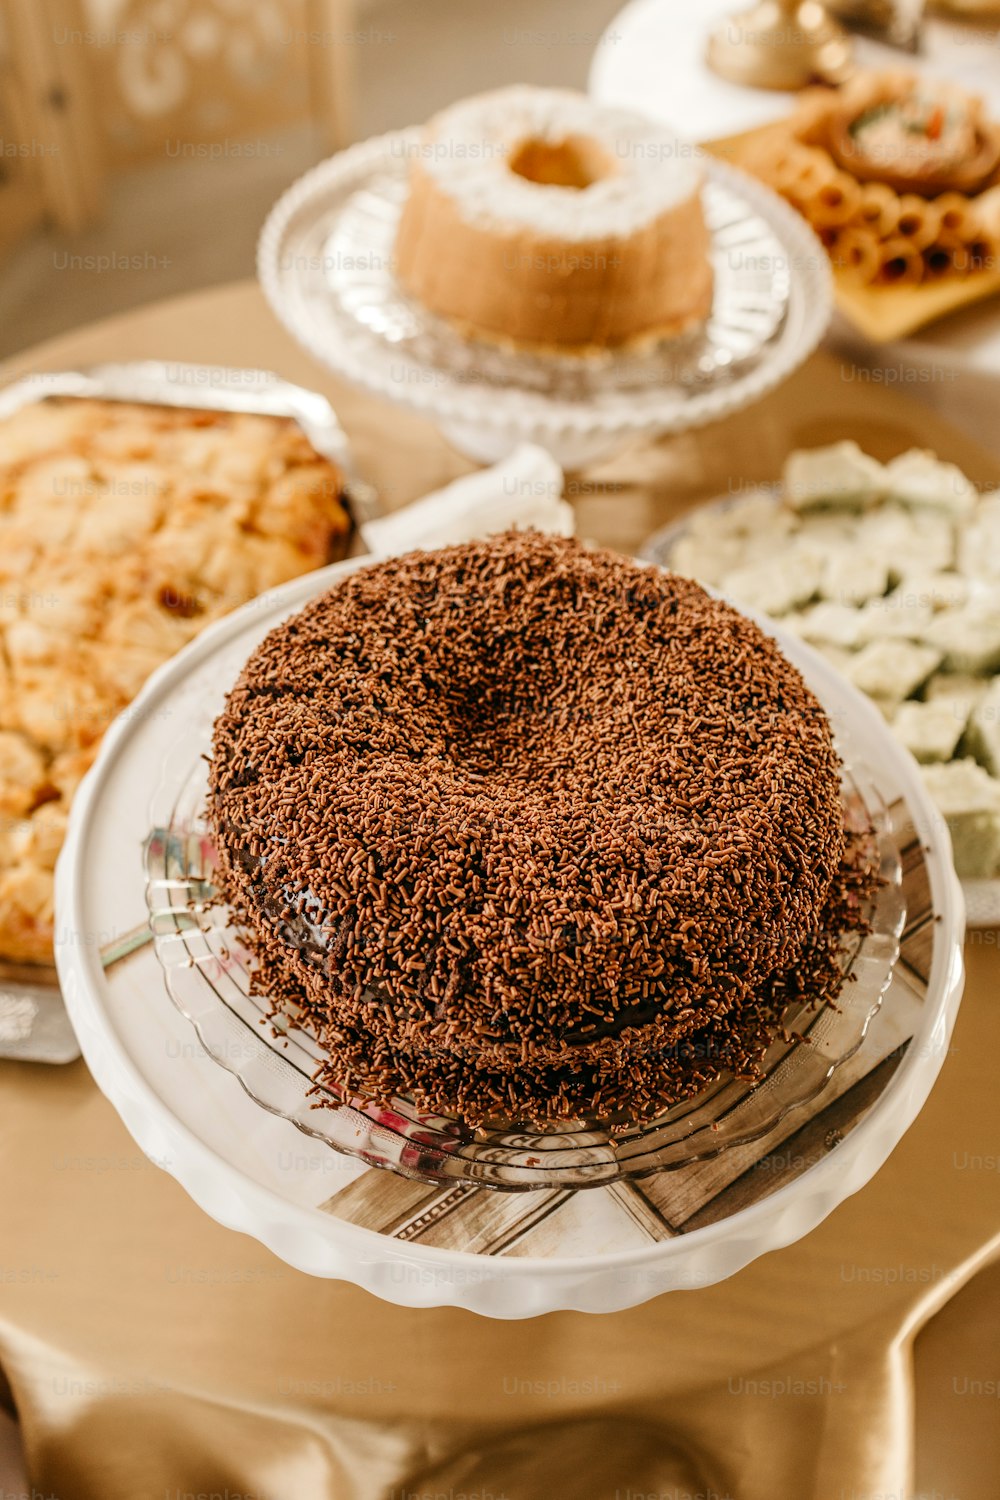 a table topped with a cake covered in chocolate frosting